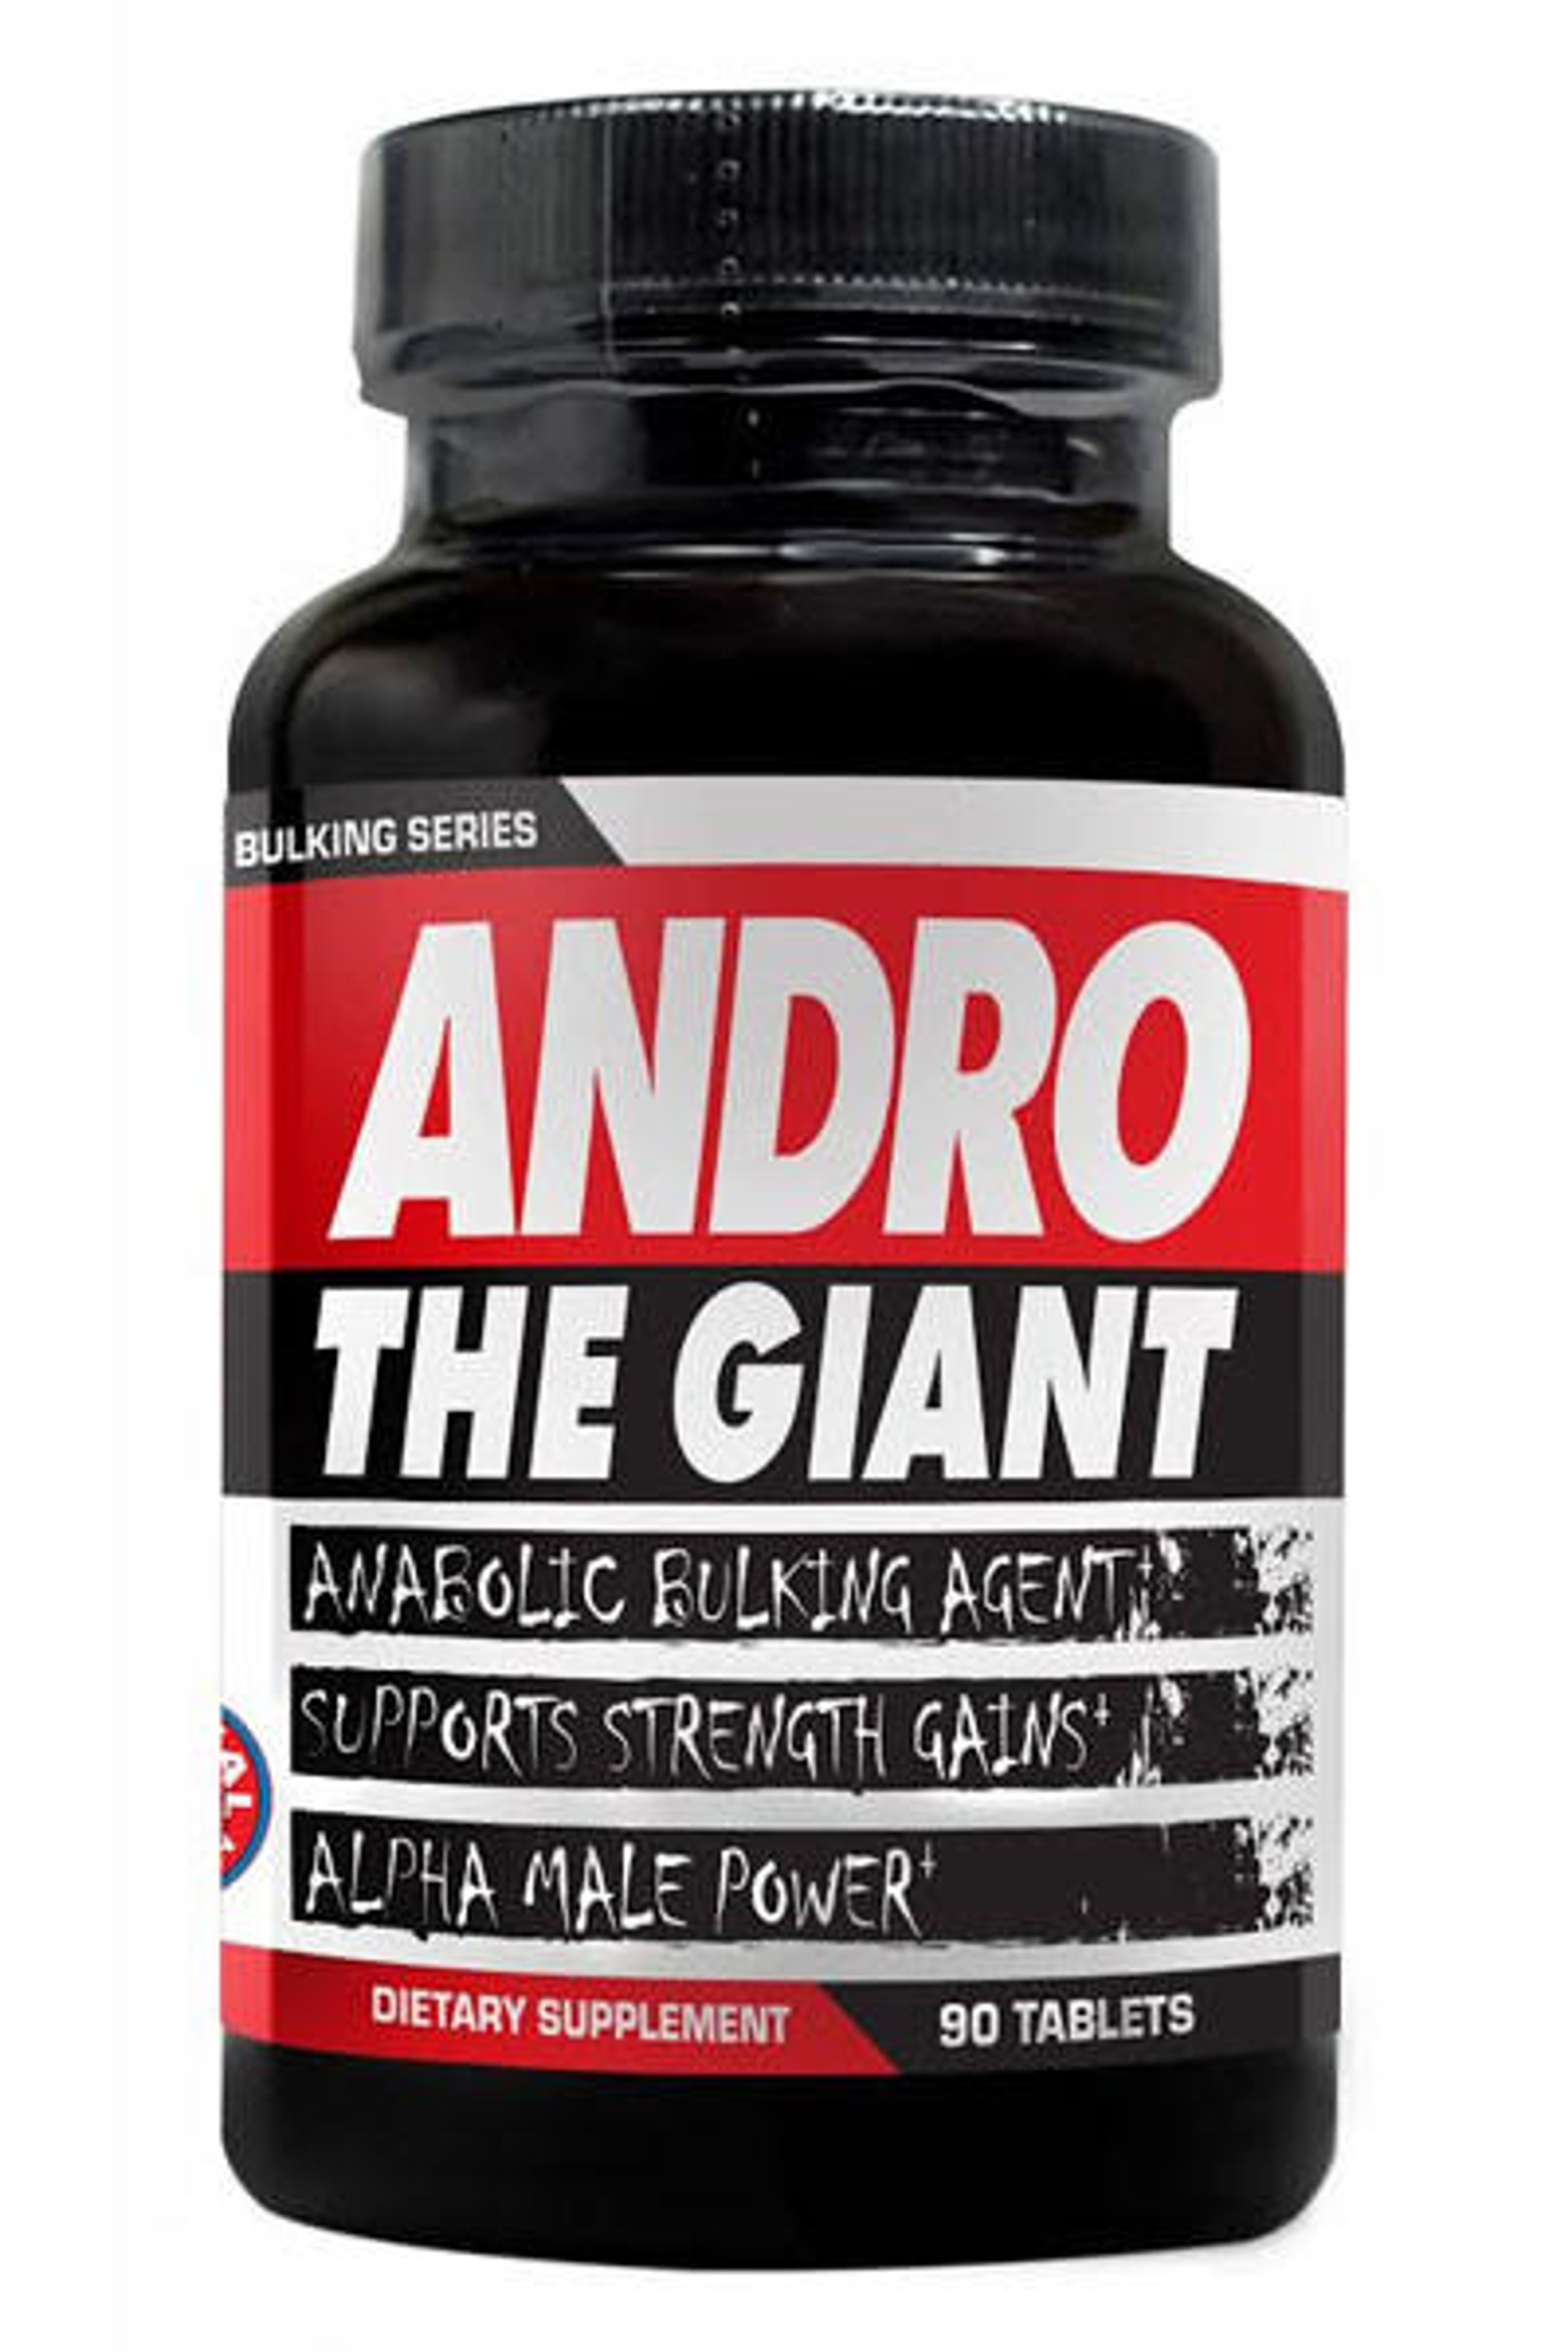 Andro The Giant by Hard Rock Supplements